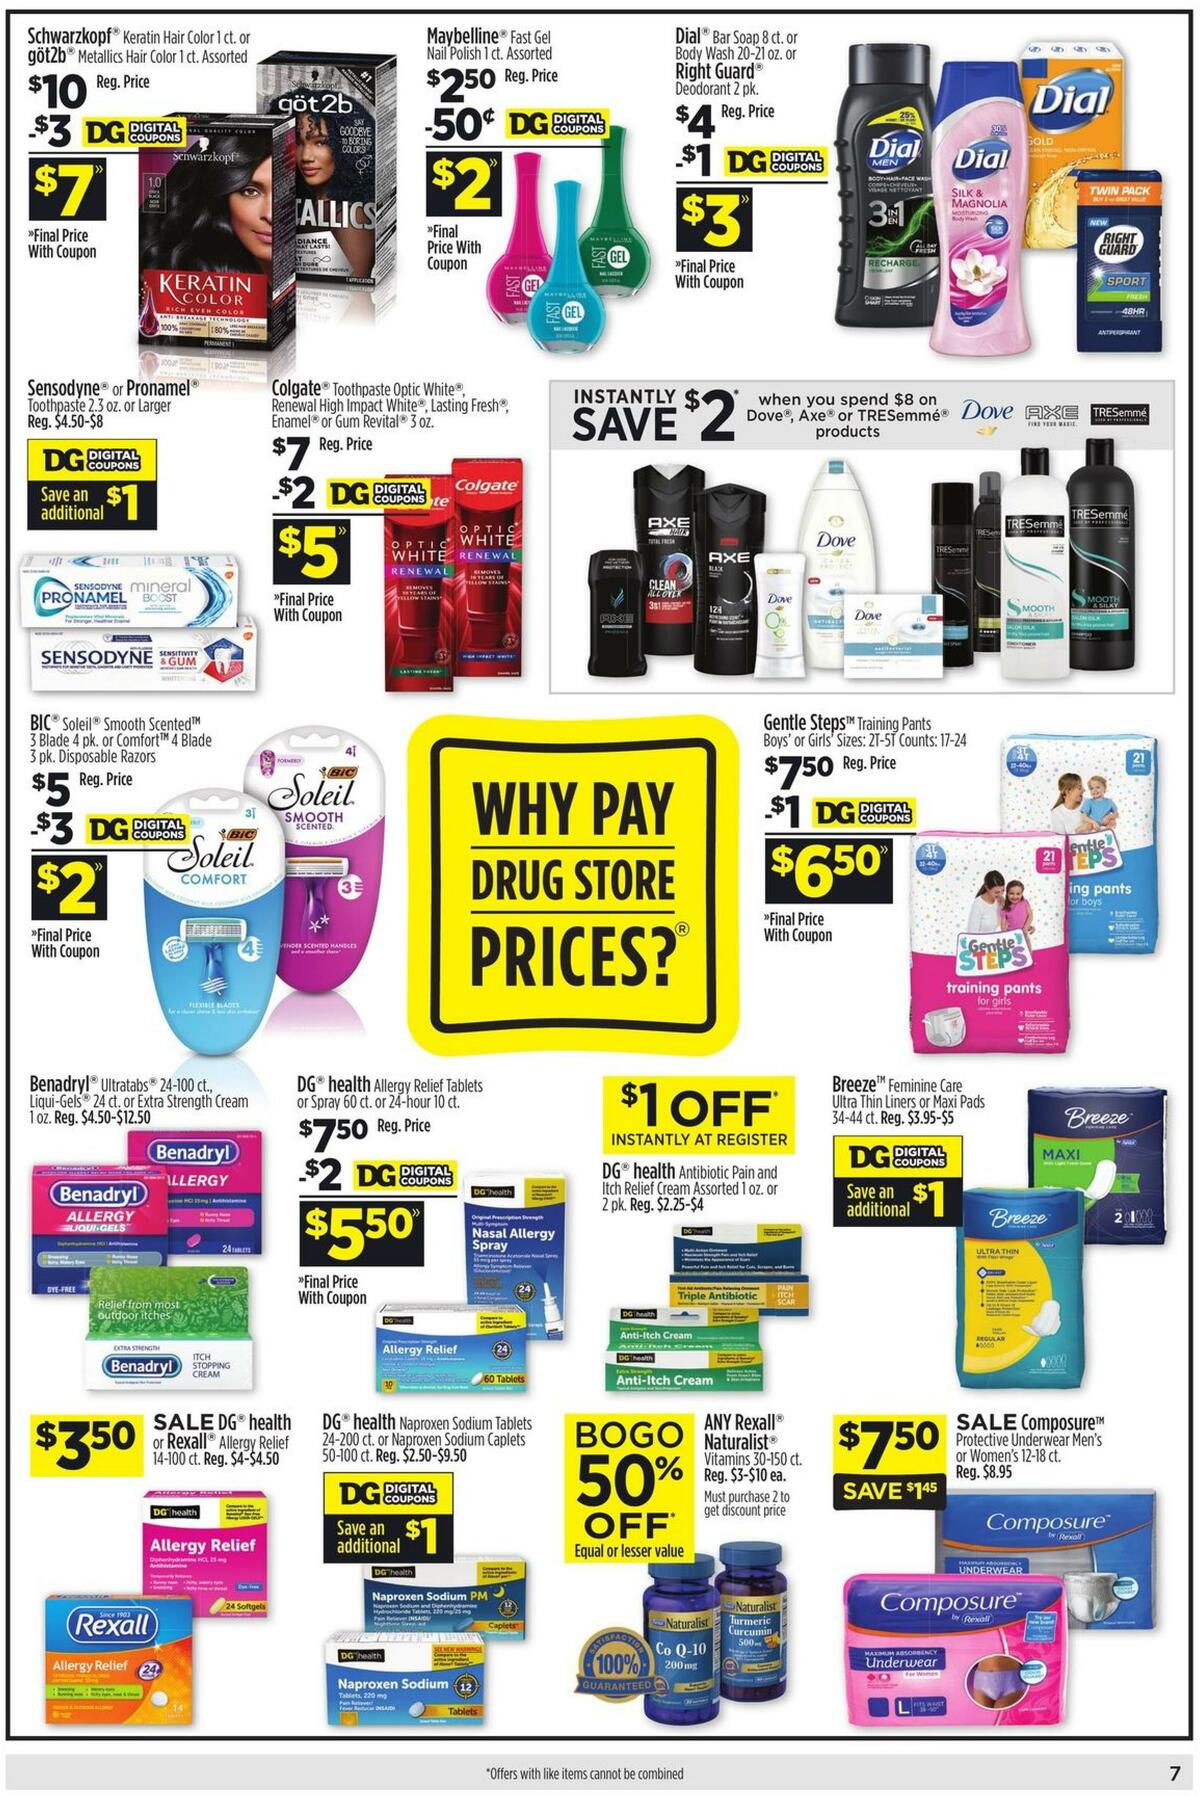 Dollar General Weekly Ad from June 6